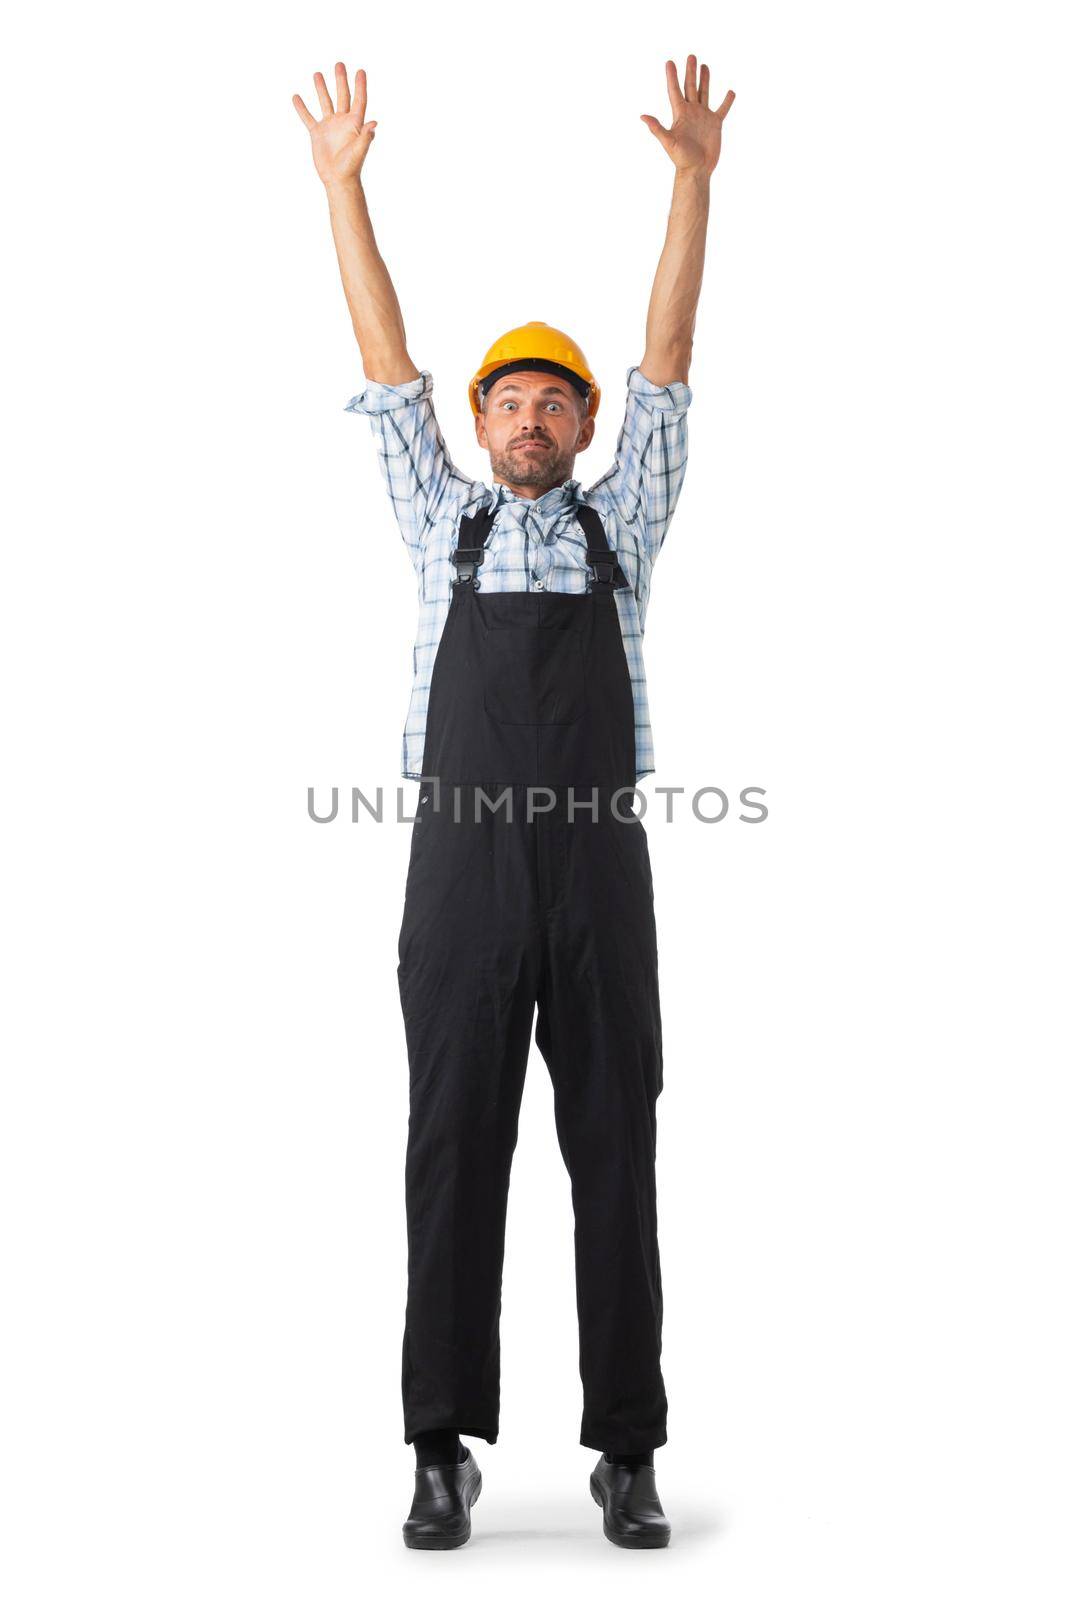 Portrait of confident male repairman contractor worker in coveralls and yellow hardhat standing with arms raised isolated on white background